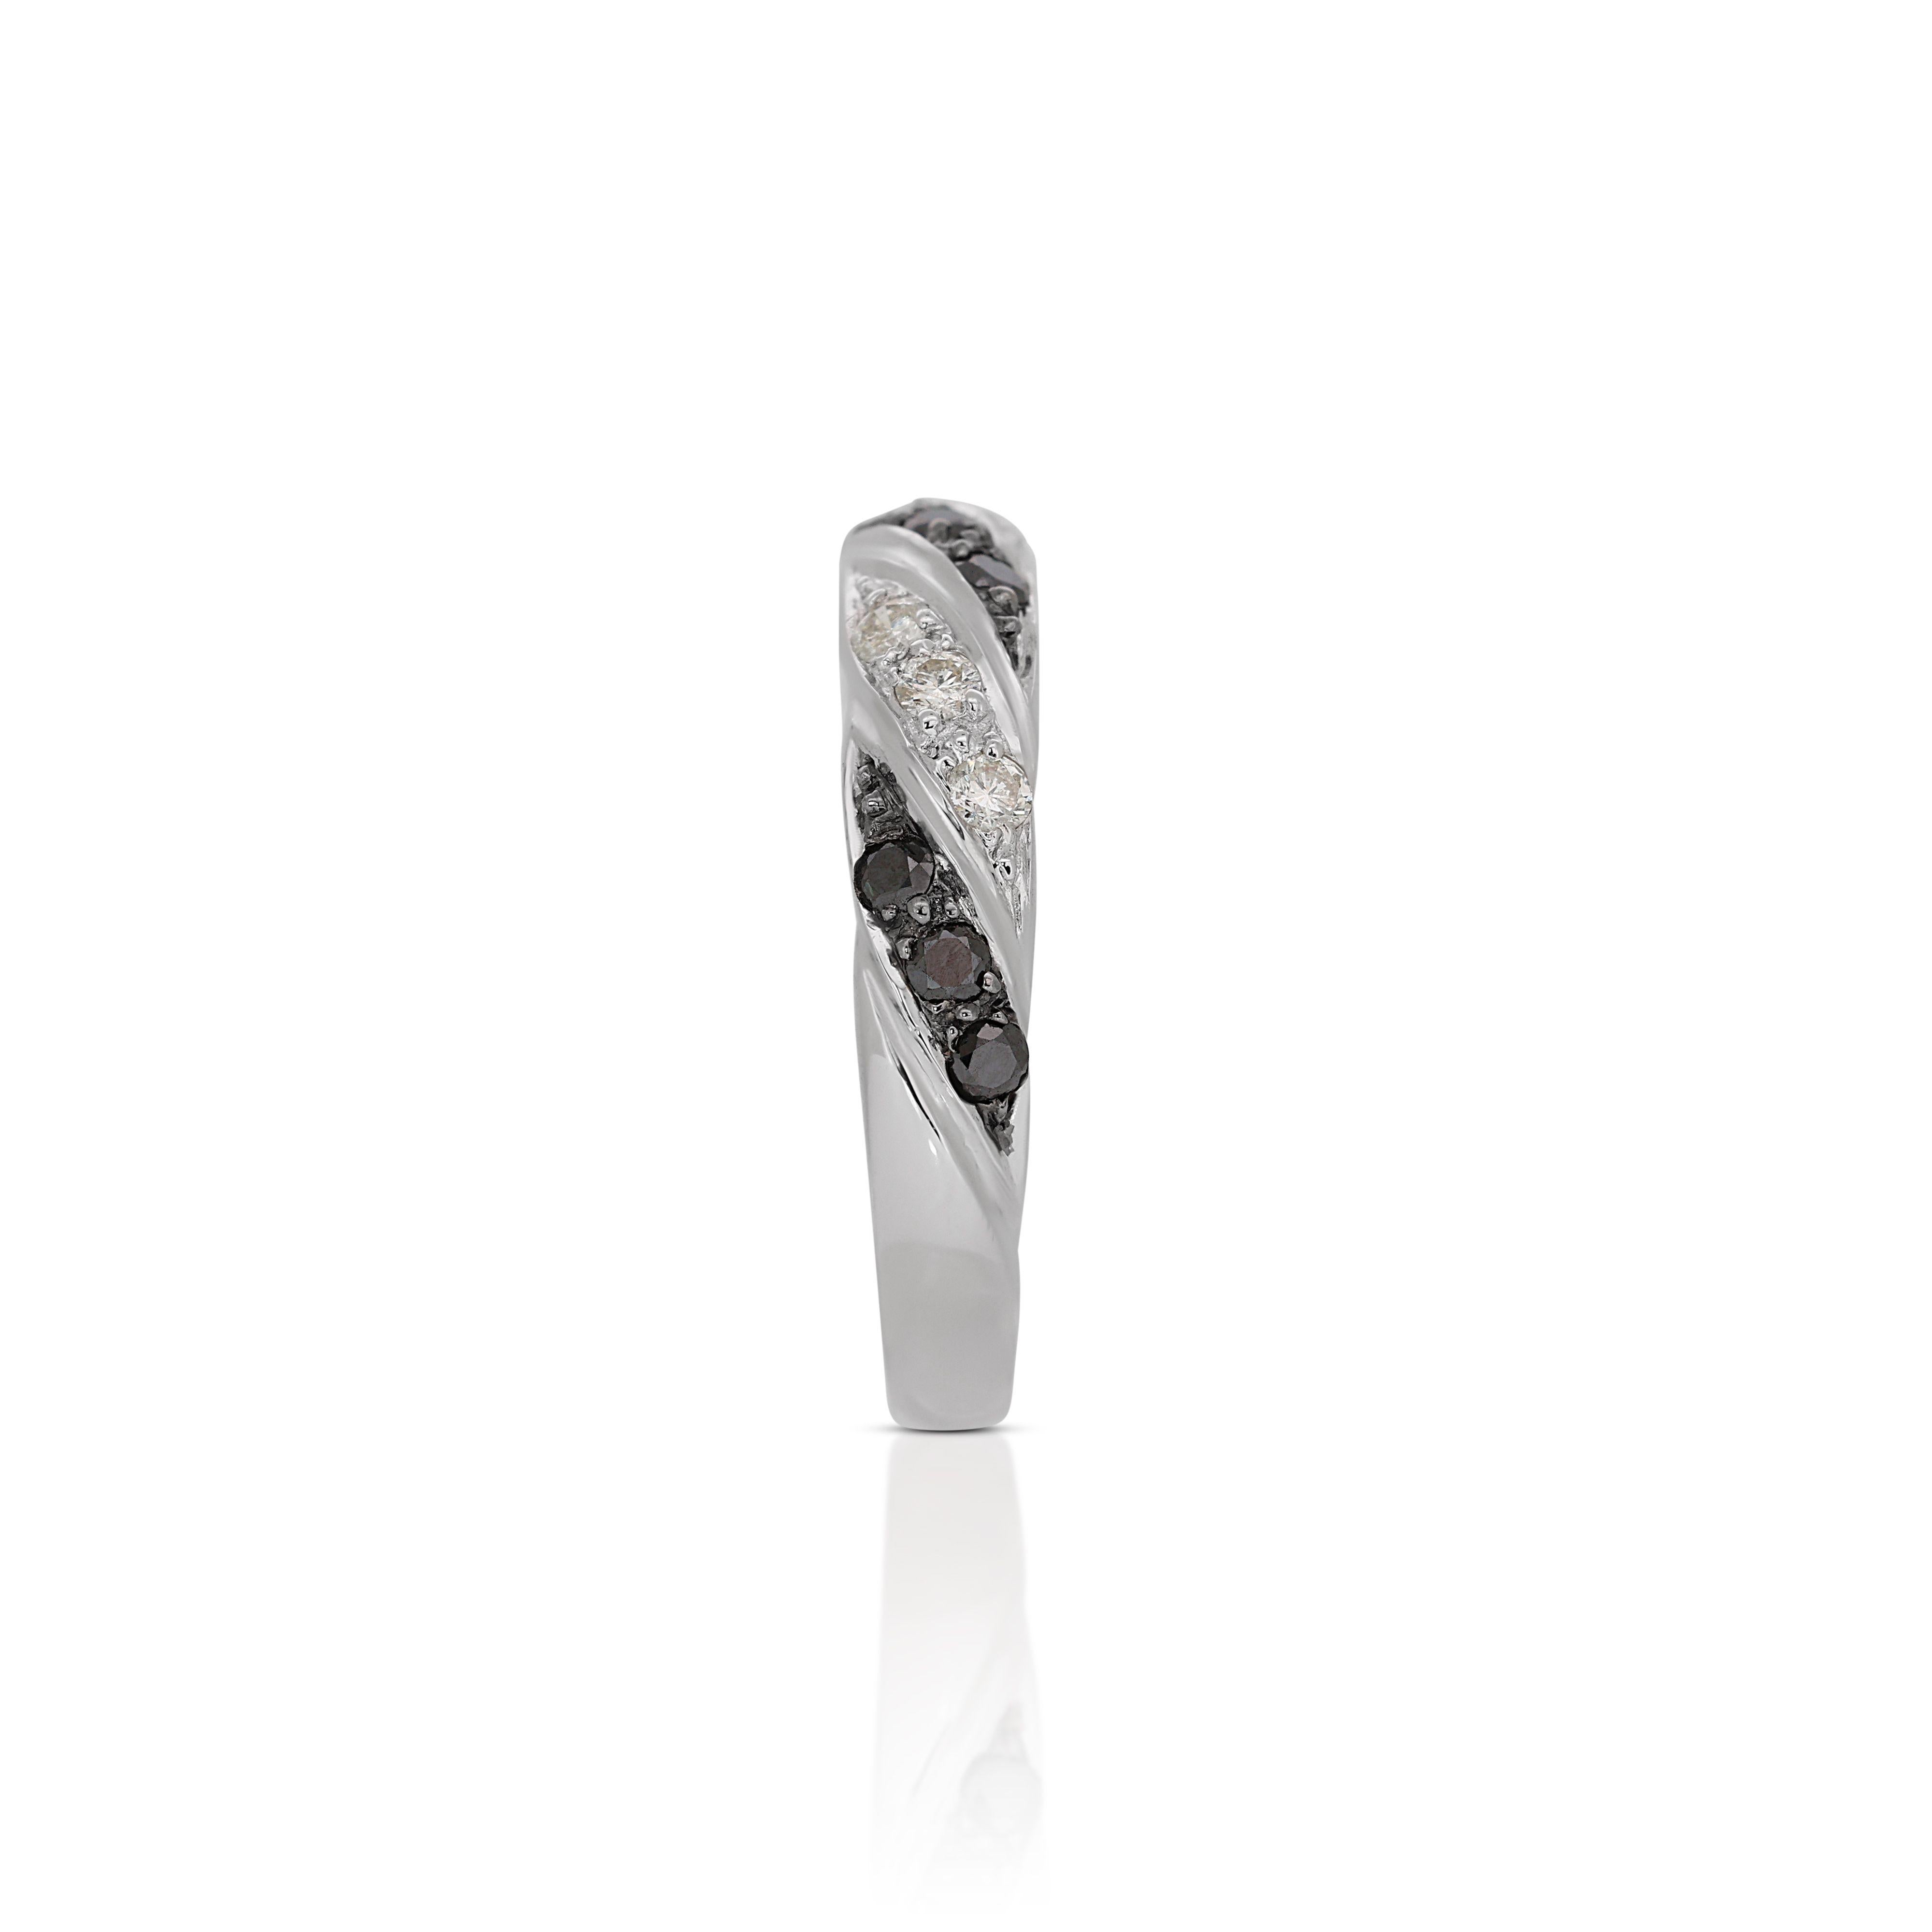 Fancy 18K White Gold Diamond Ring with 0.36ct Natural Diamond For Sale 1